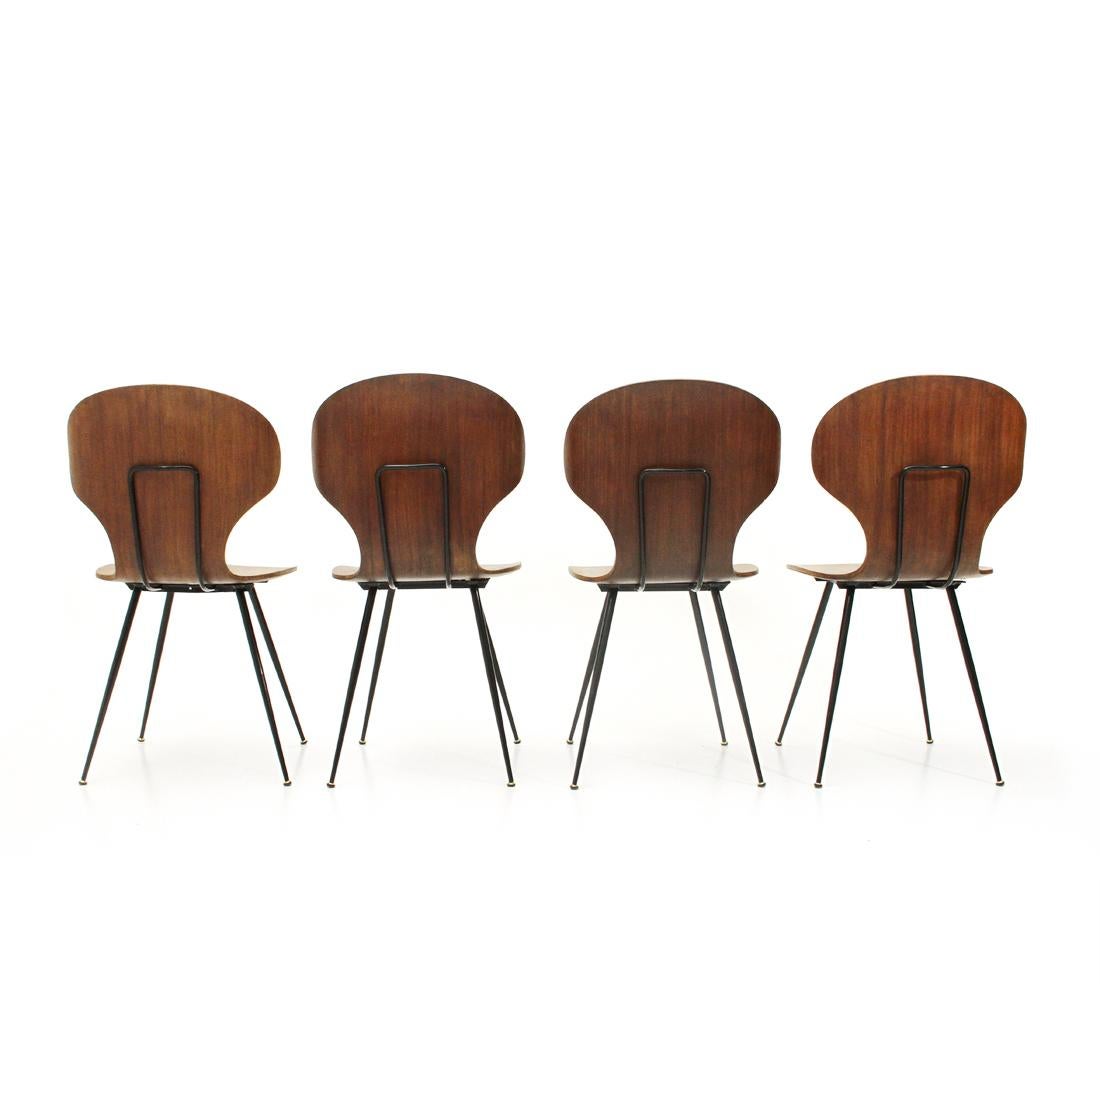 Mid-20th Century Lully Plywood Chair by Carlo Ratti for Industria Legni Curvati, Set of Four